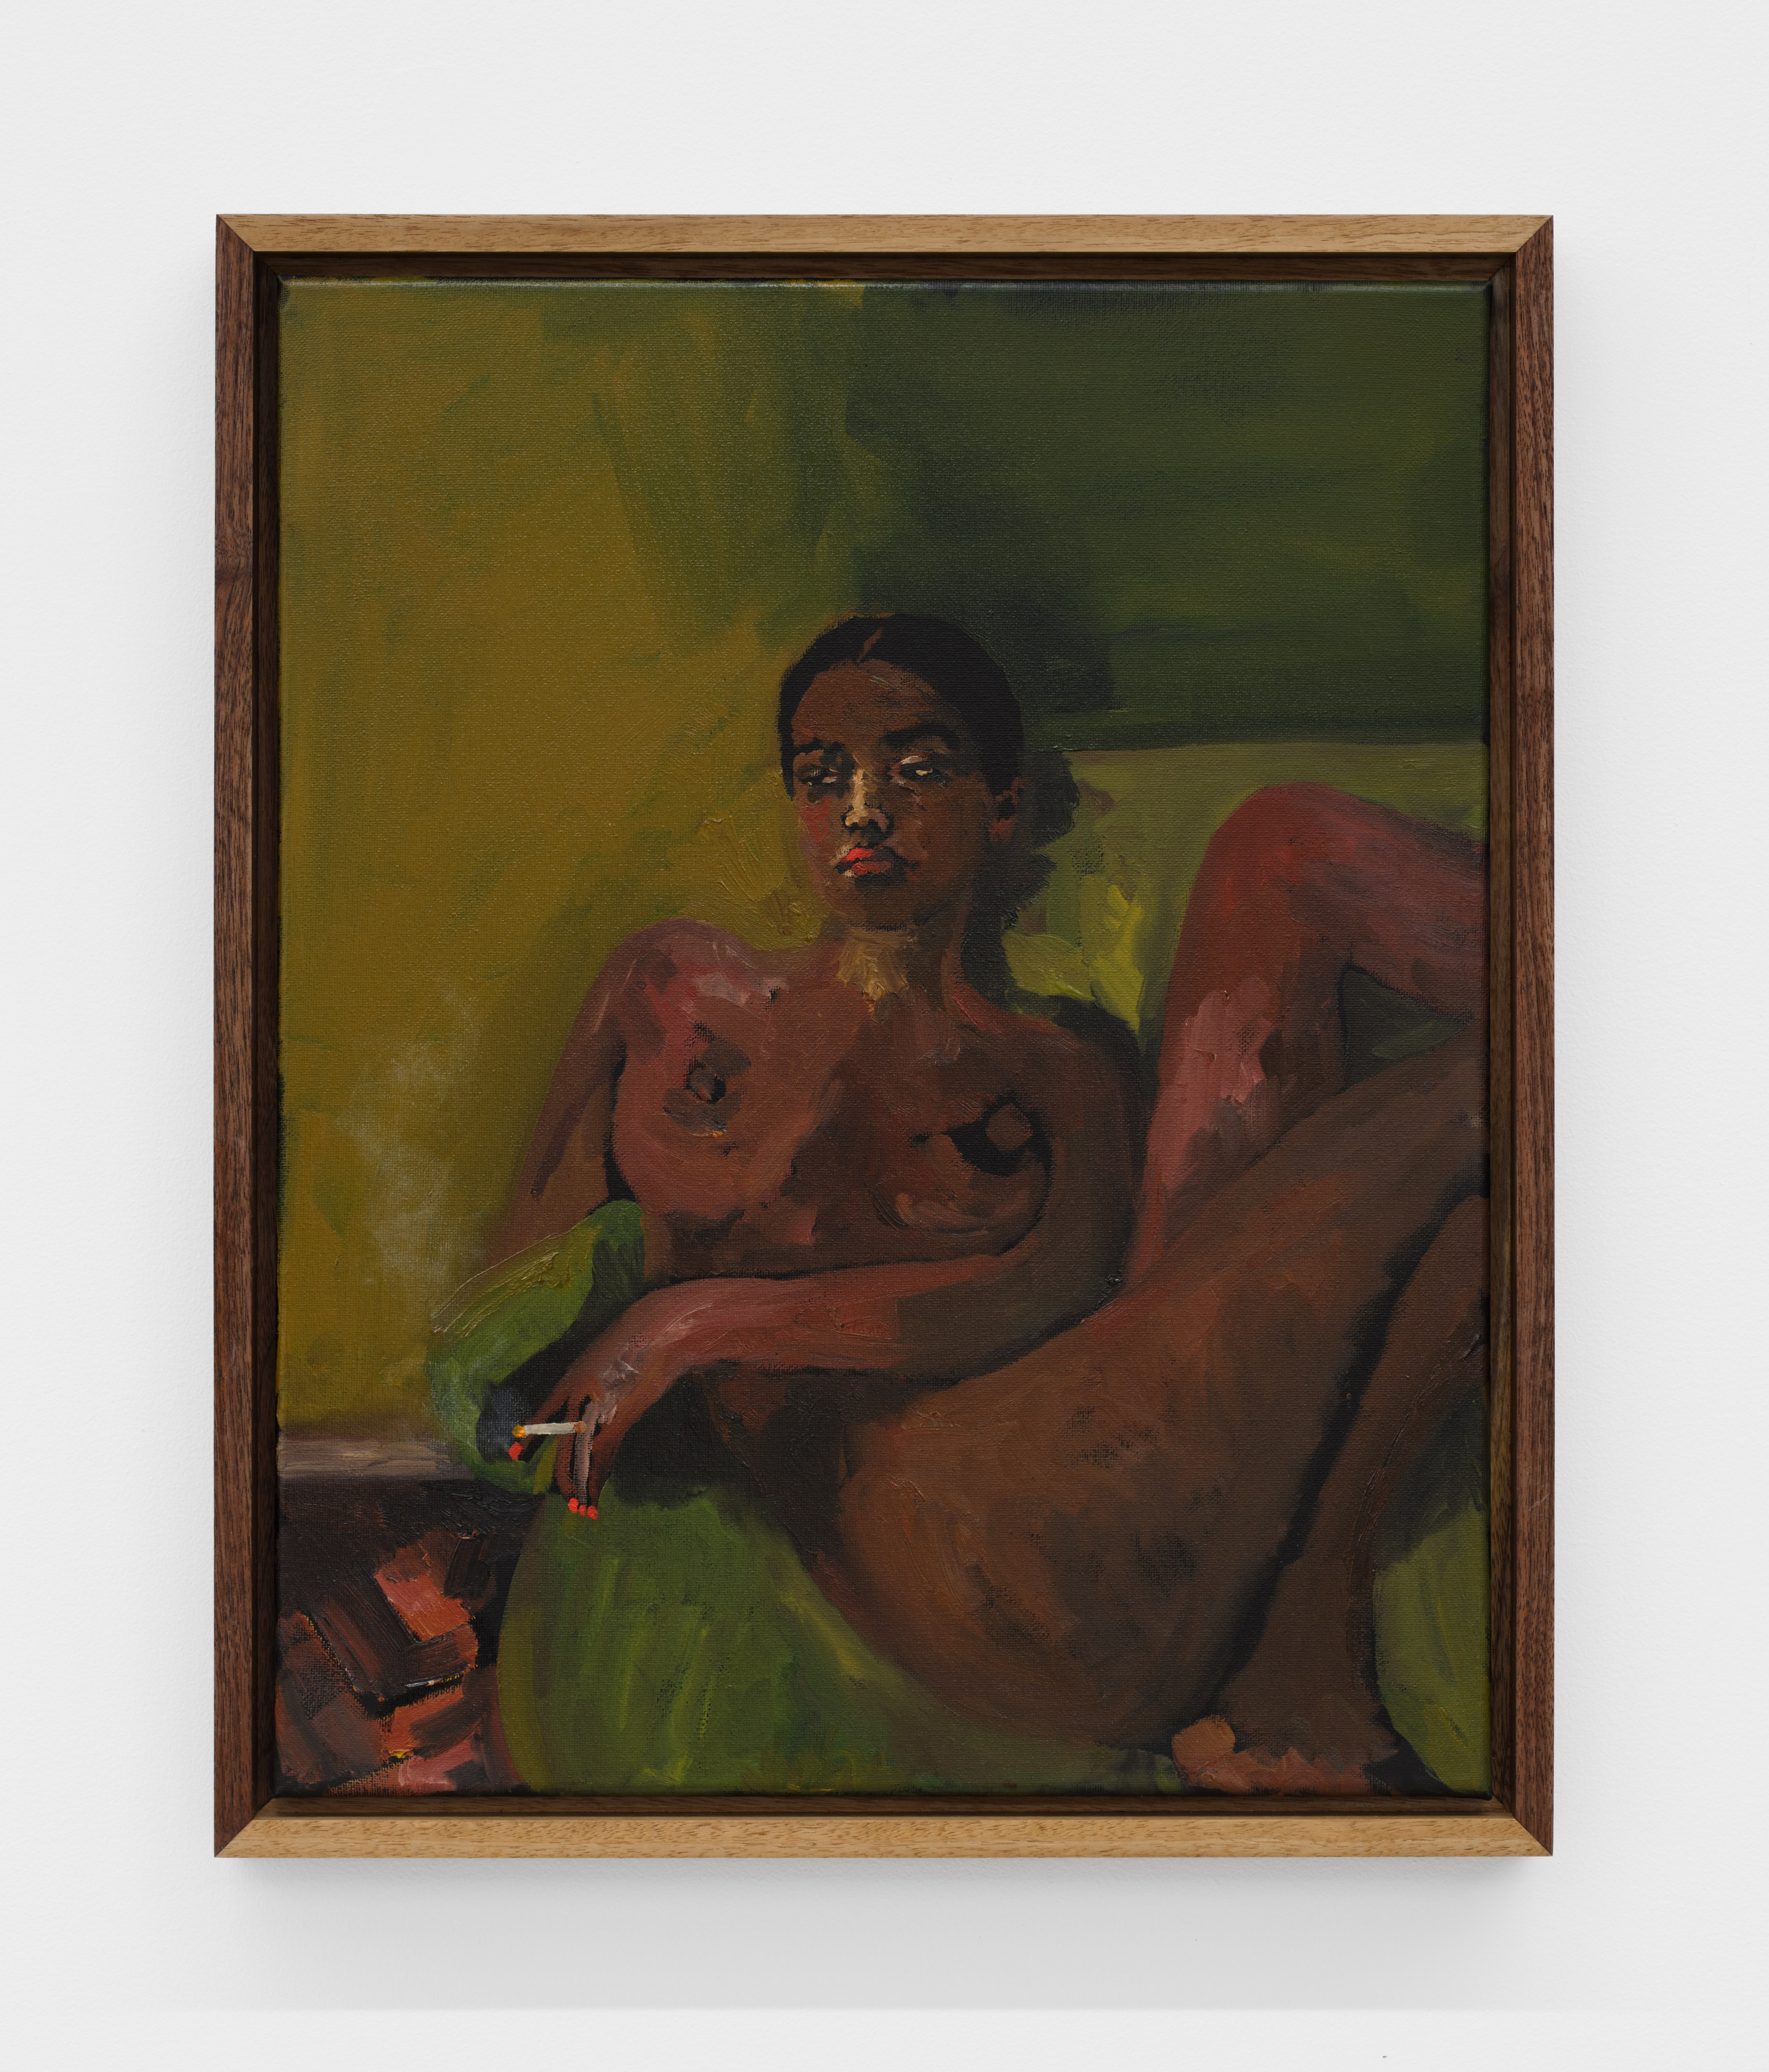 A woman rests nude on a green sofa while smoking a cigarette. 